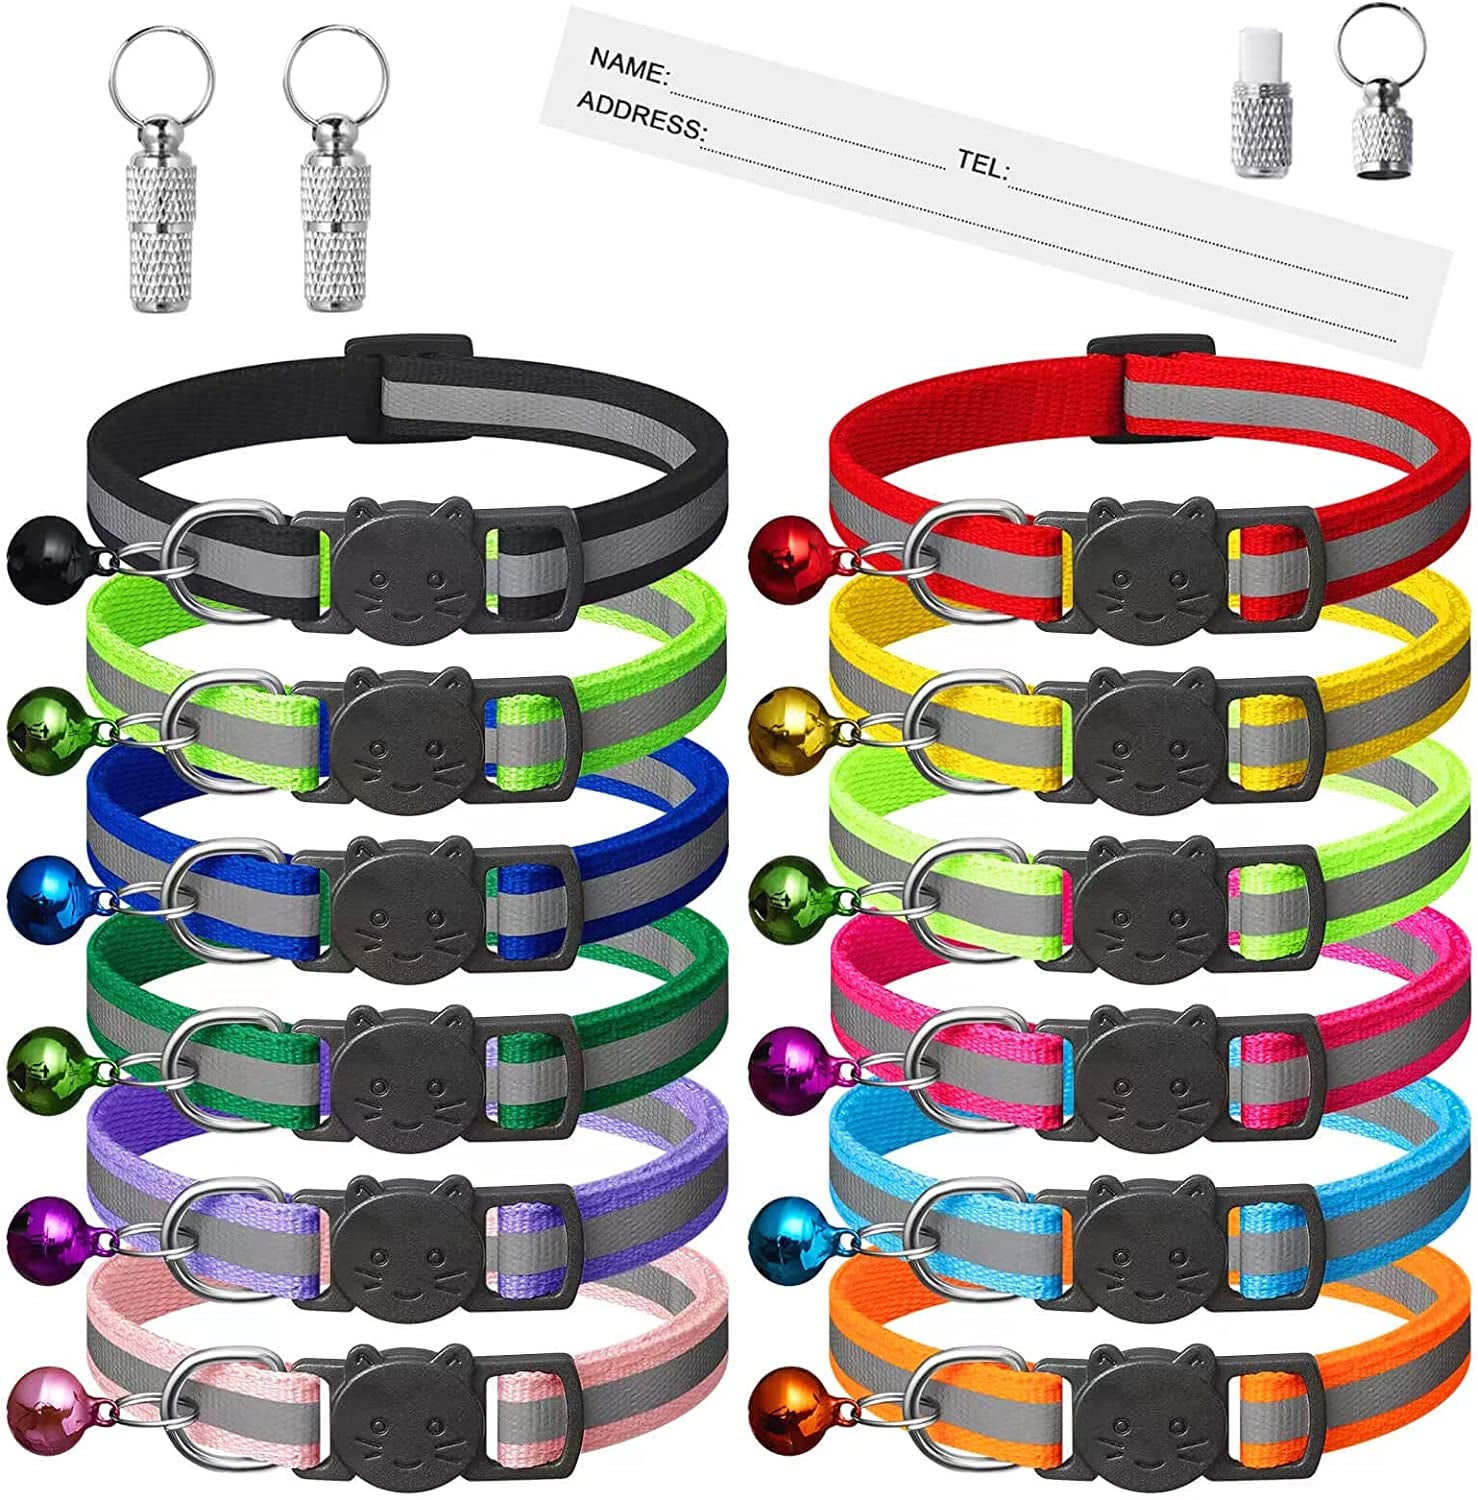 14 Pack Reflective-Breakaway Cat Collars with Bells,Safety Buckle Kitten Collar,With Name Tag,Adjustable,Ideal for Girl Cats Male Cats,Pet Supplies,Stuff,Accessories(12 Colors & 2 ID Tags)